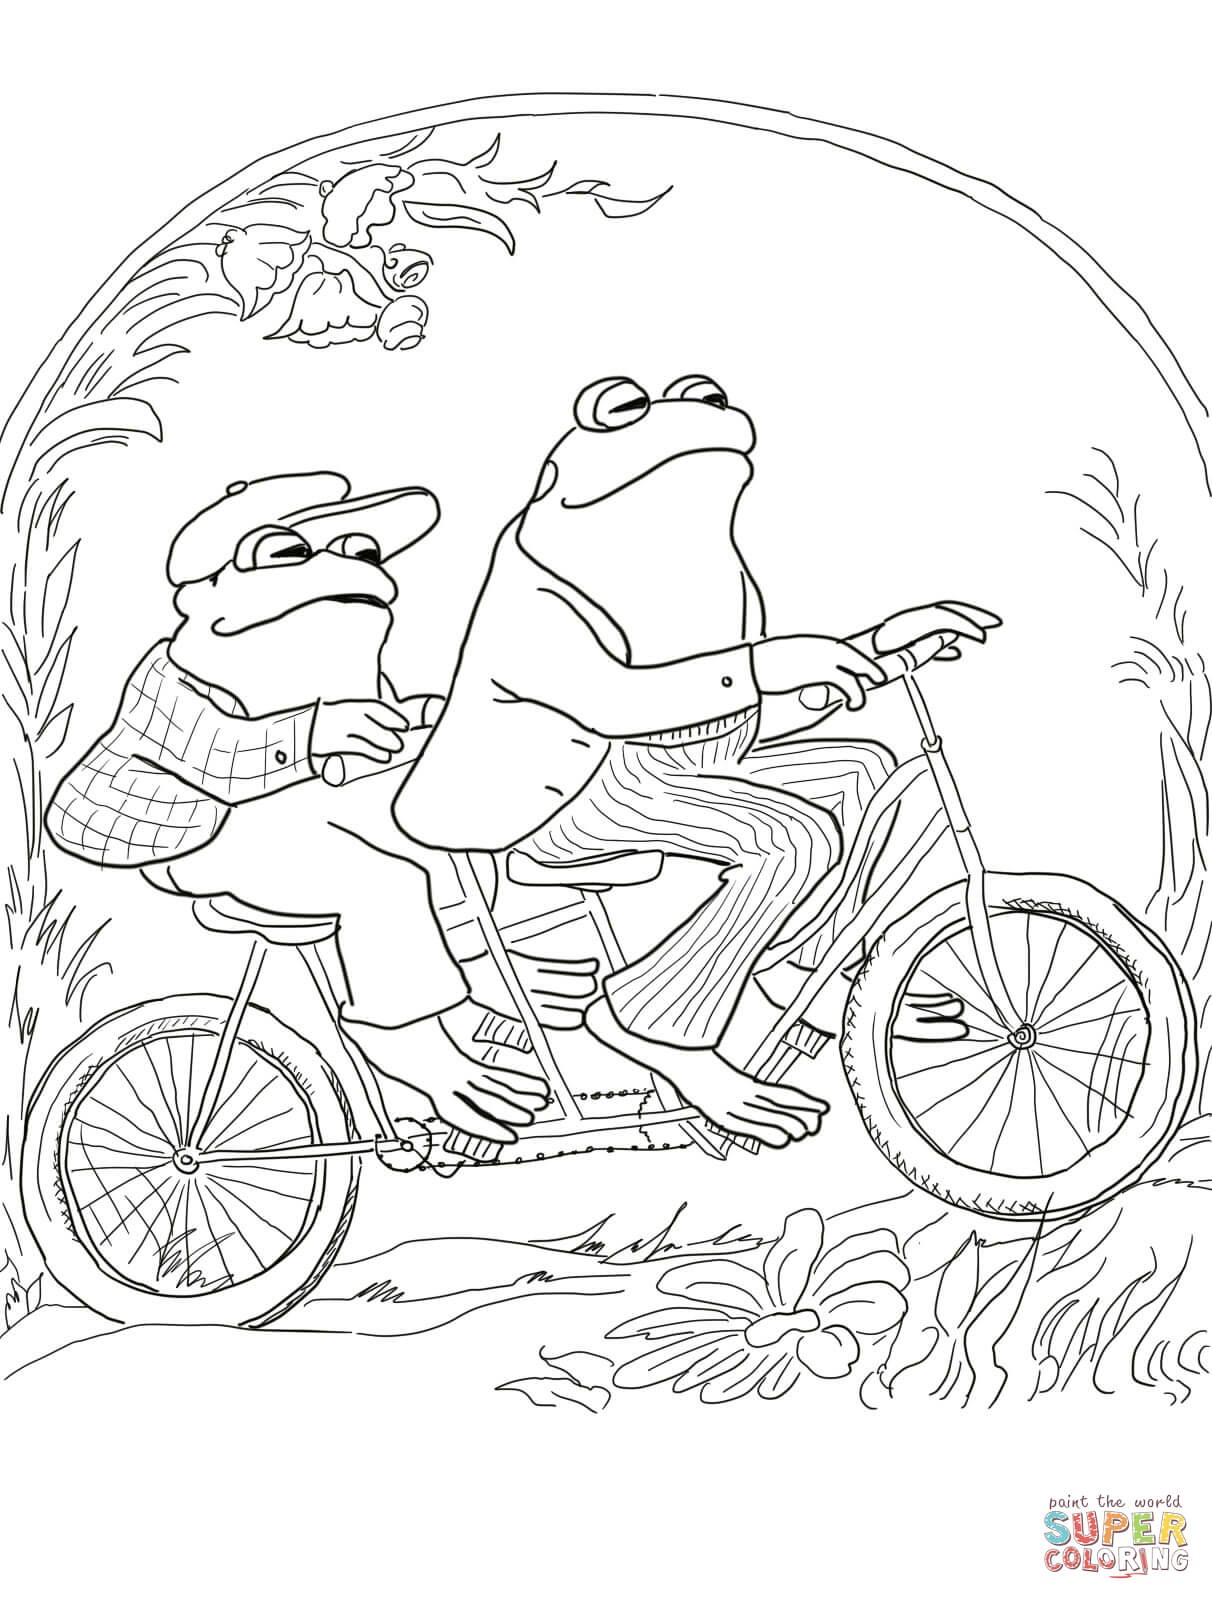 Frog And Toad Coloring Pages | Free Coloring Pages - Free Frog And Toad Are Friends Printables